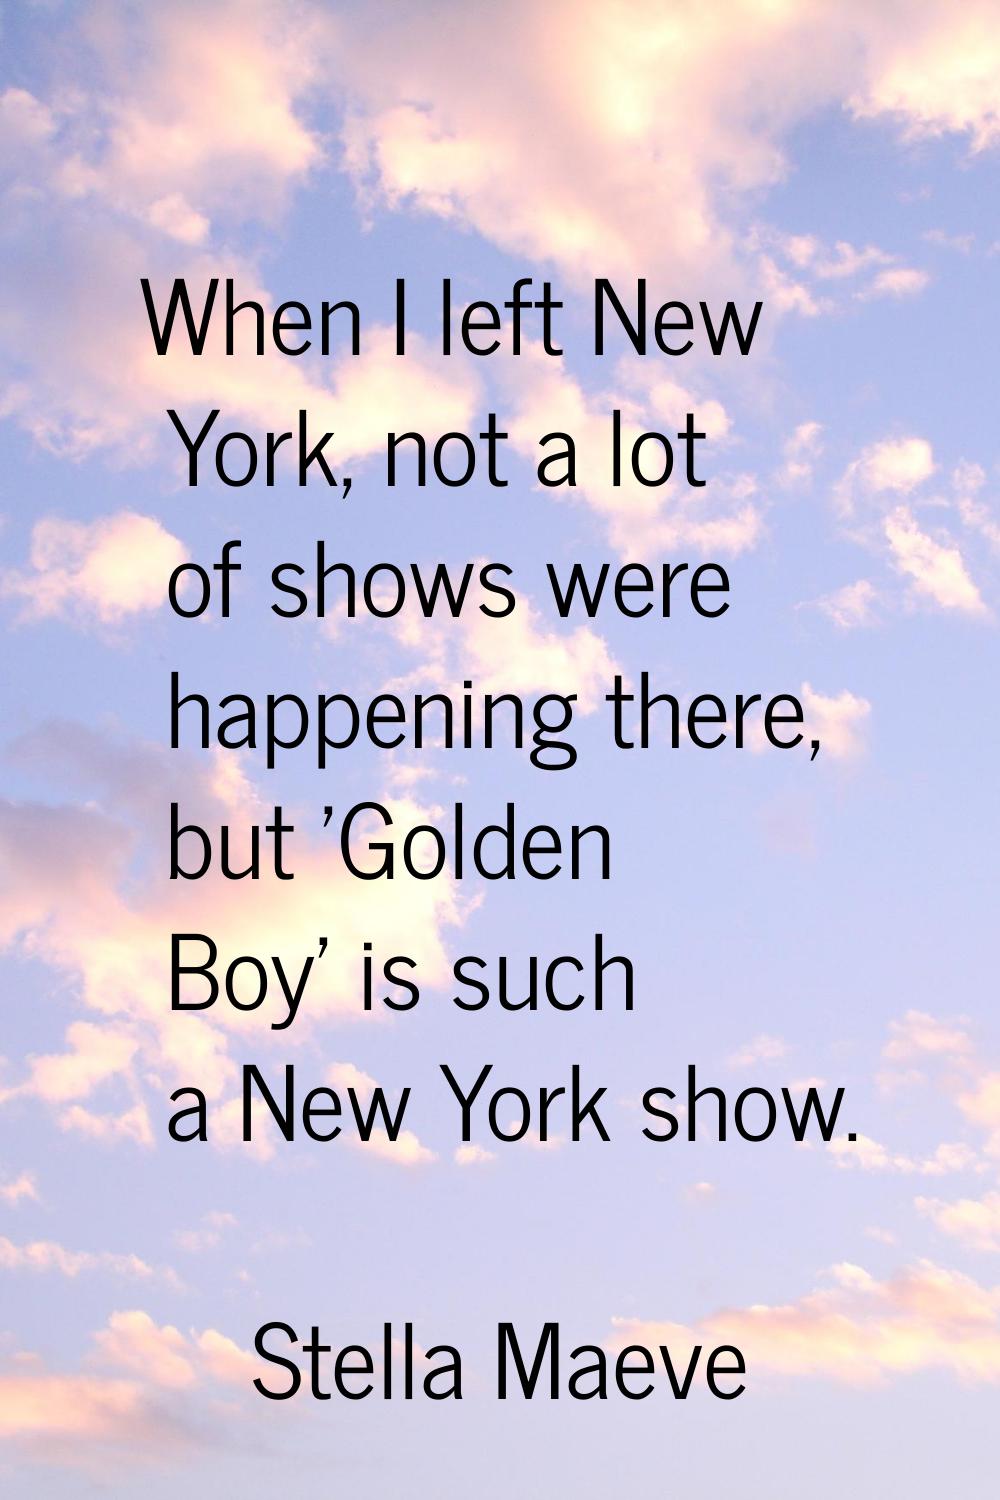 When I left New York, not a lot of shows were happening there, but 'Golden Boy' is such a New York 